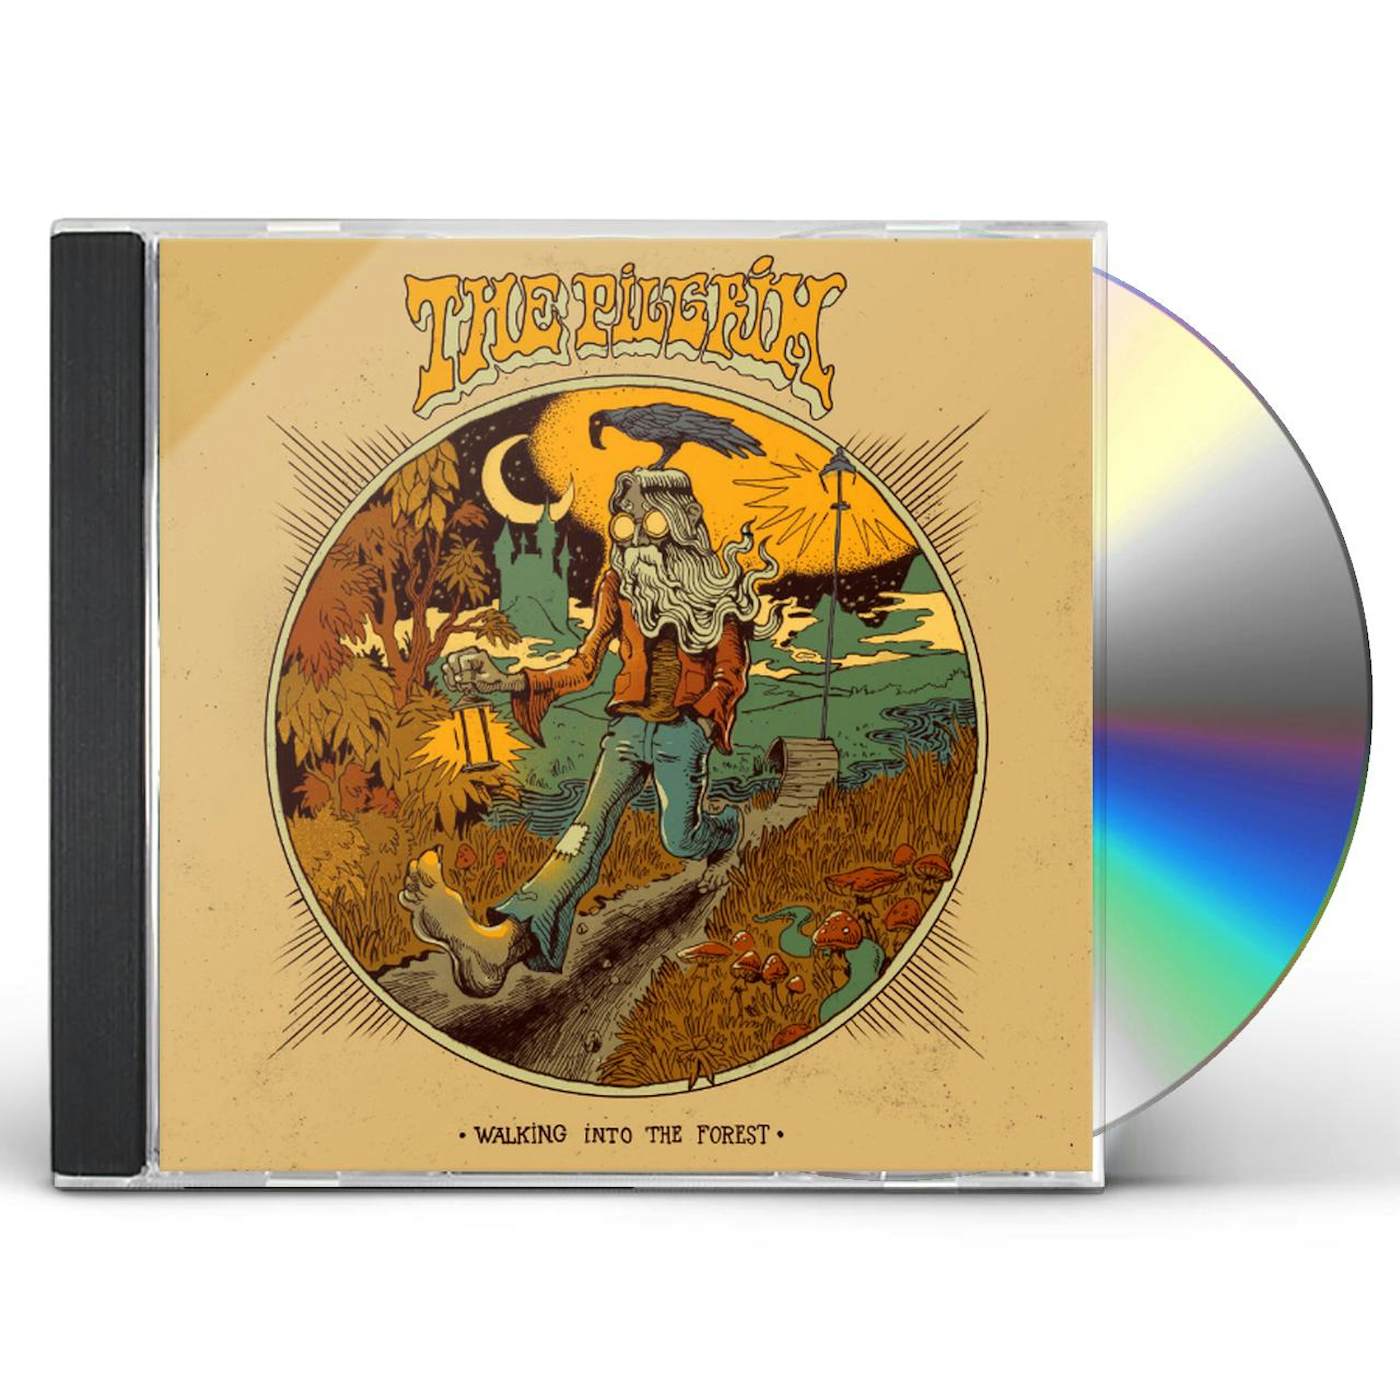 The Pilgrim WALKING INTO THE FOREST CD